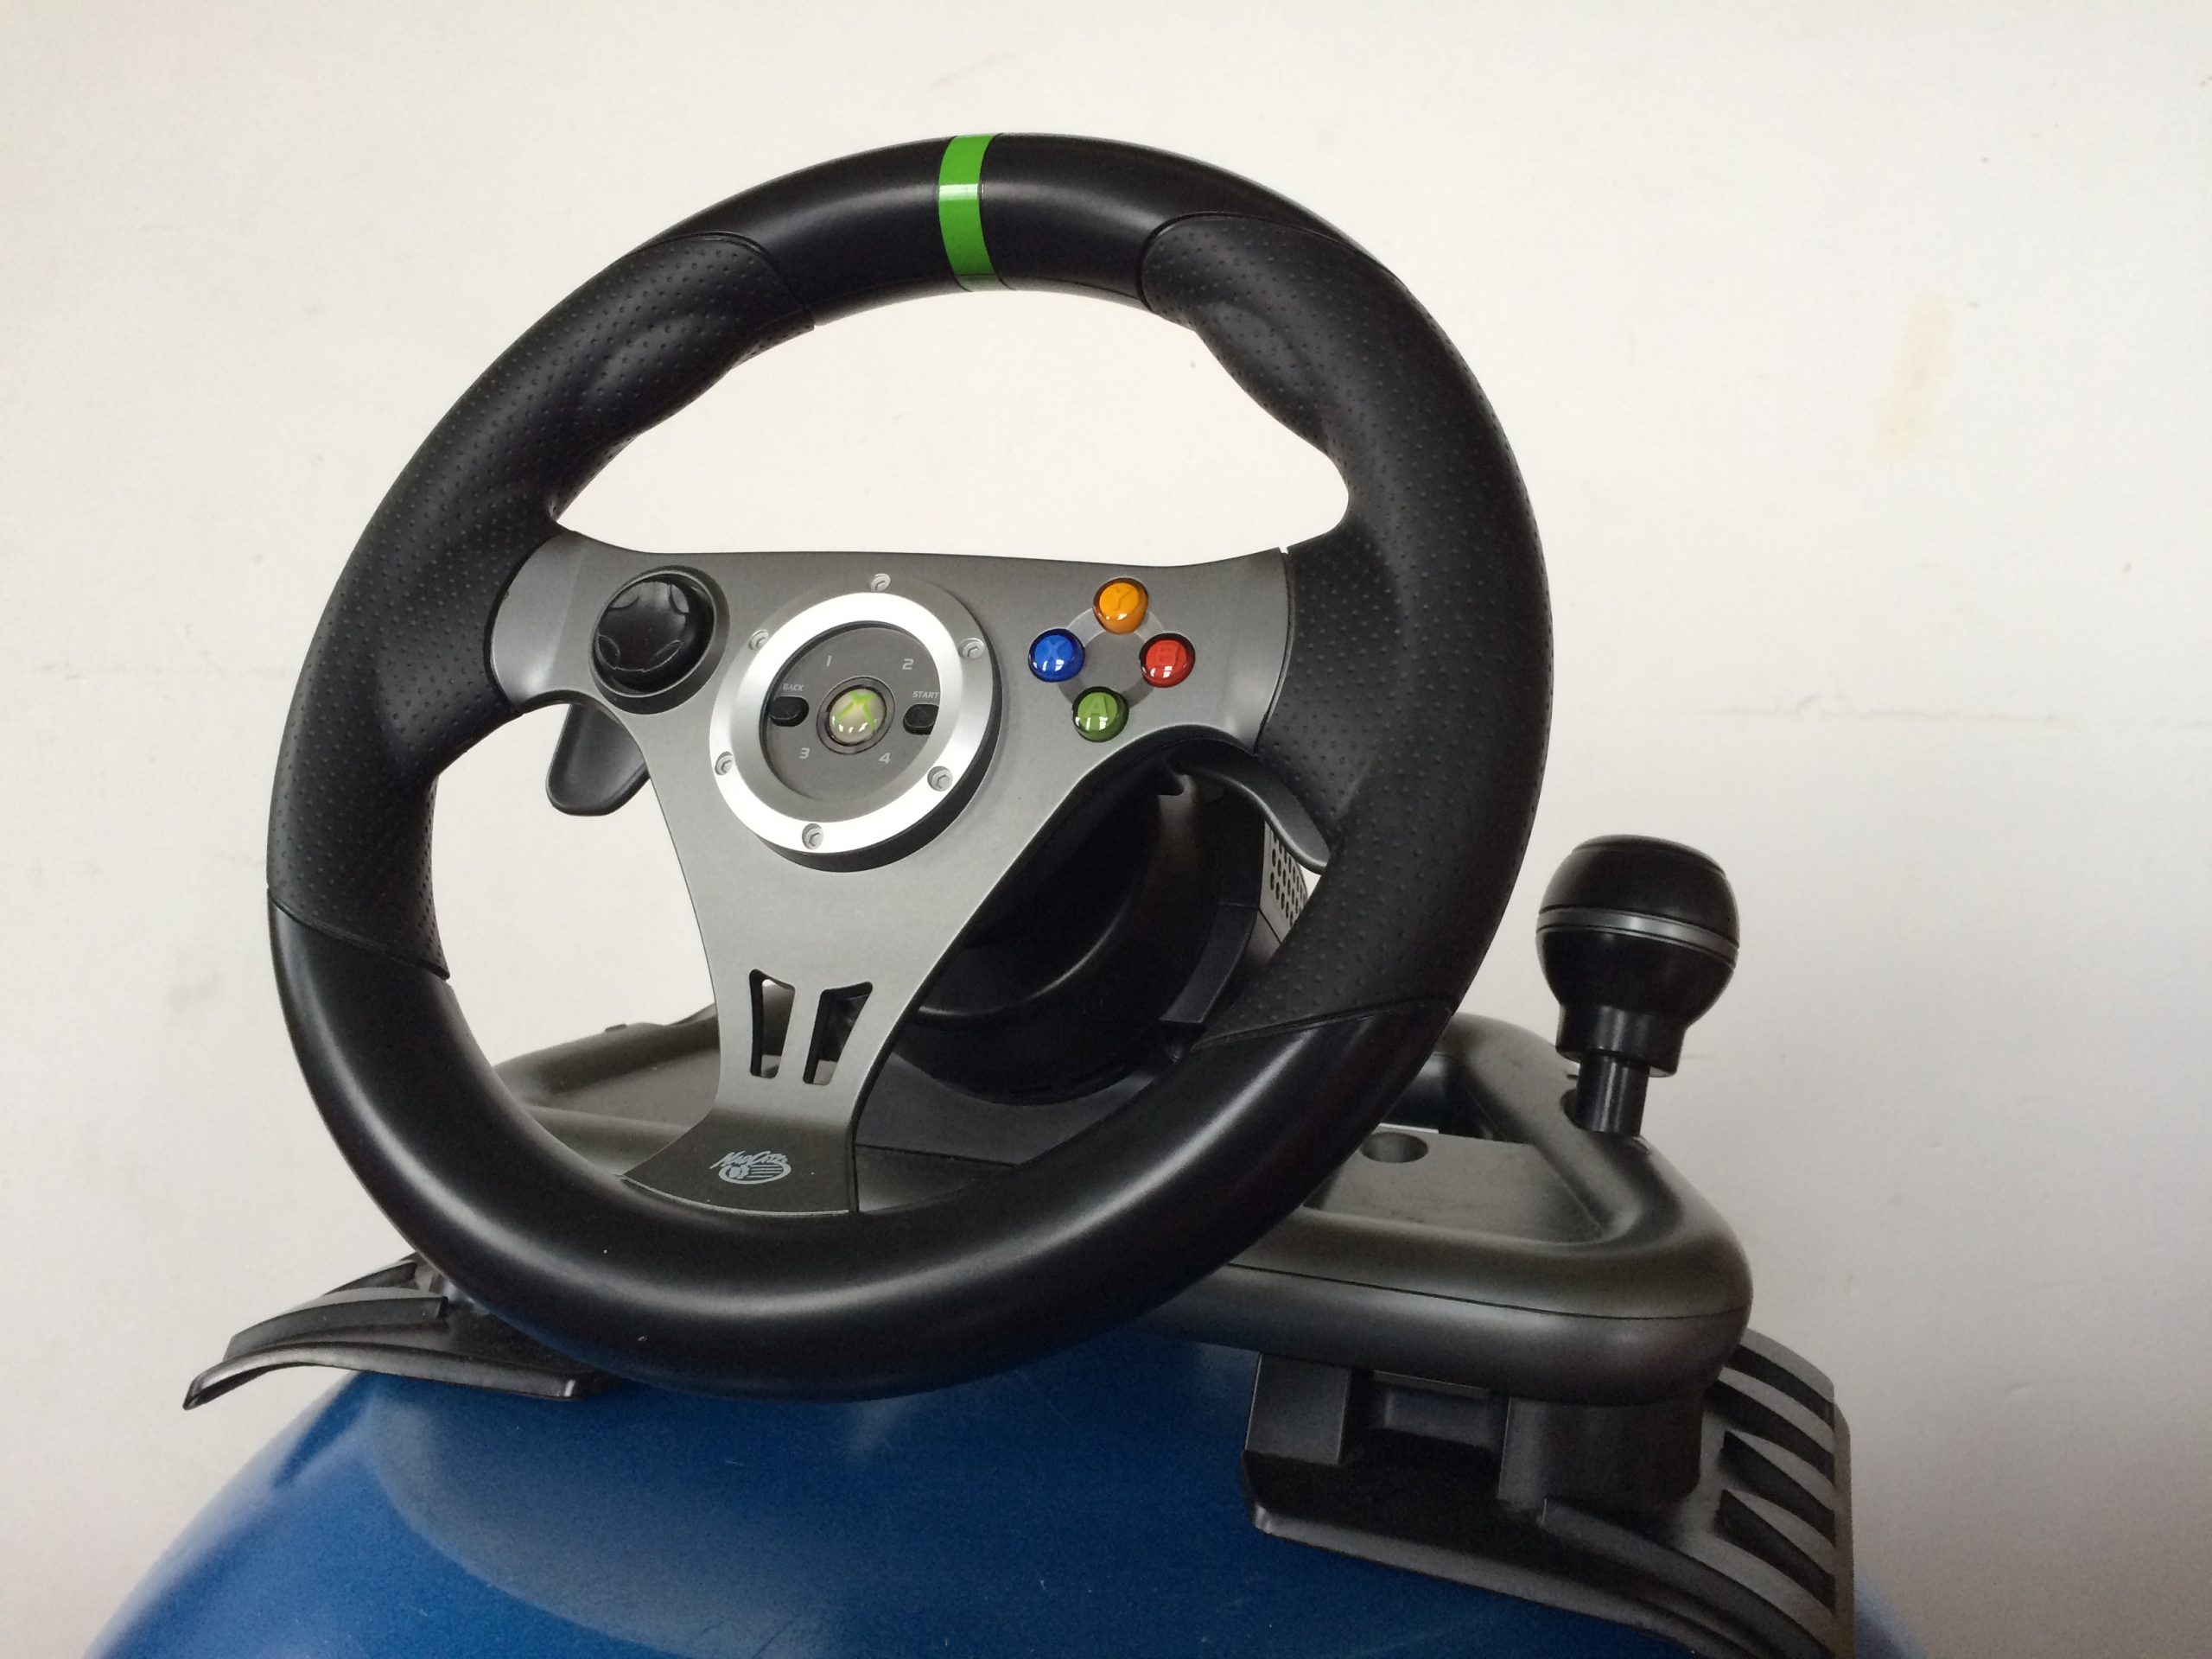 rims racing xbox series x review